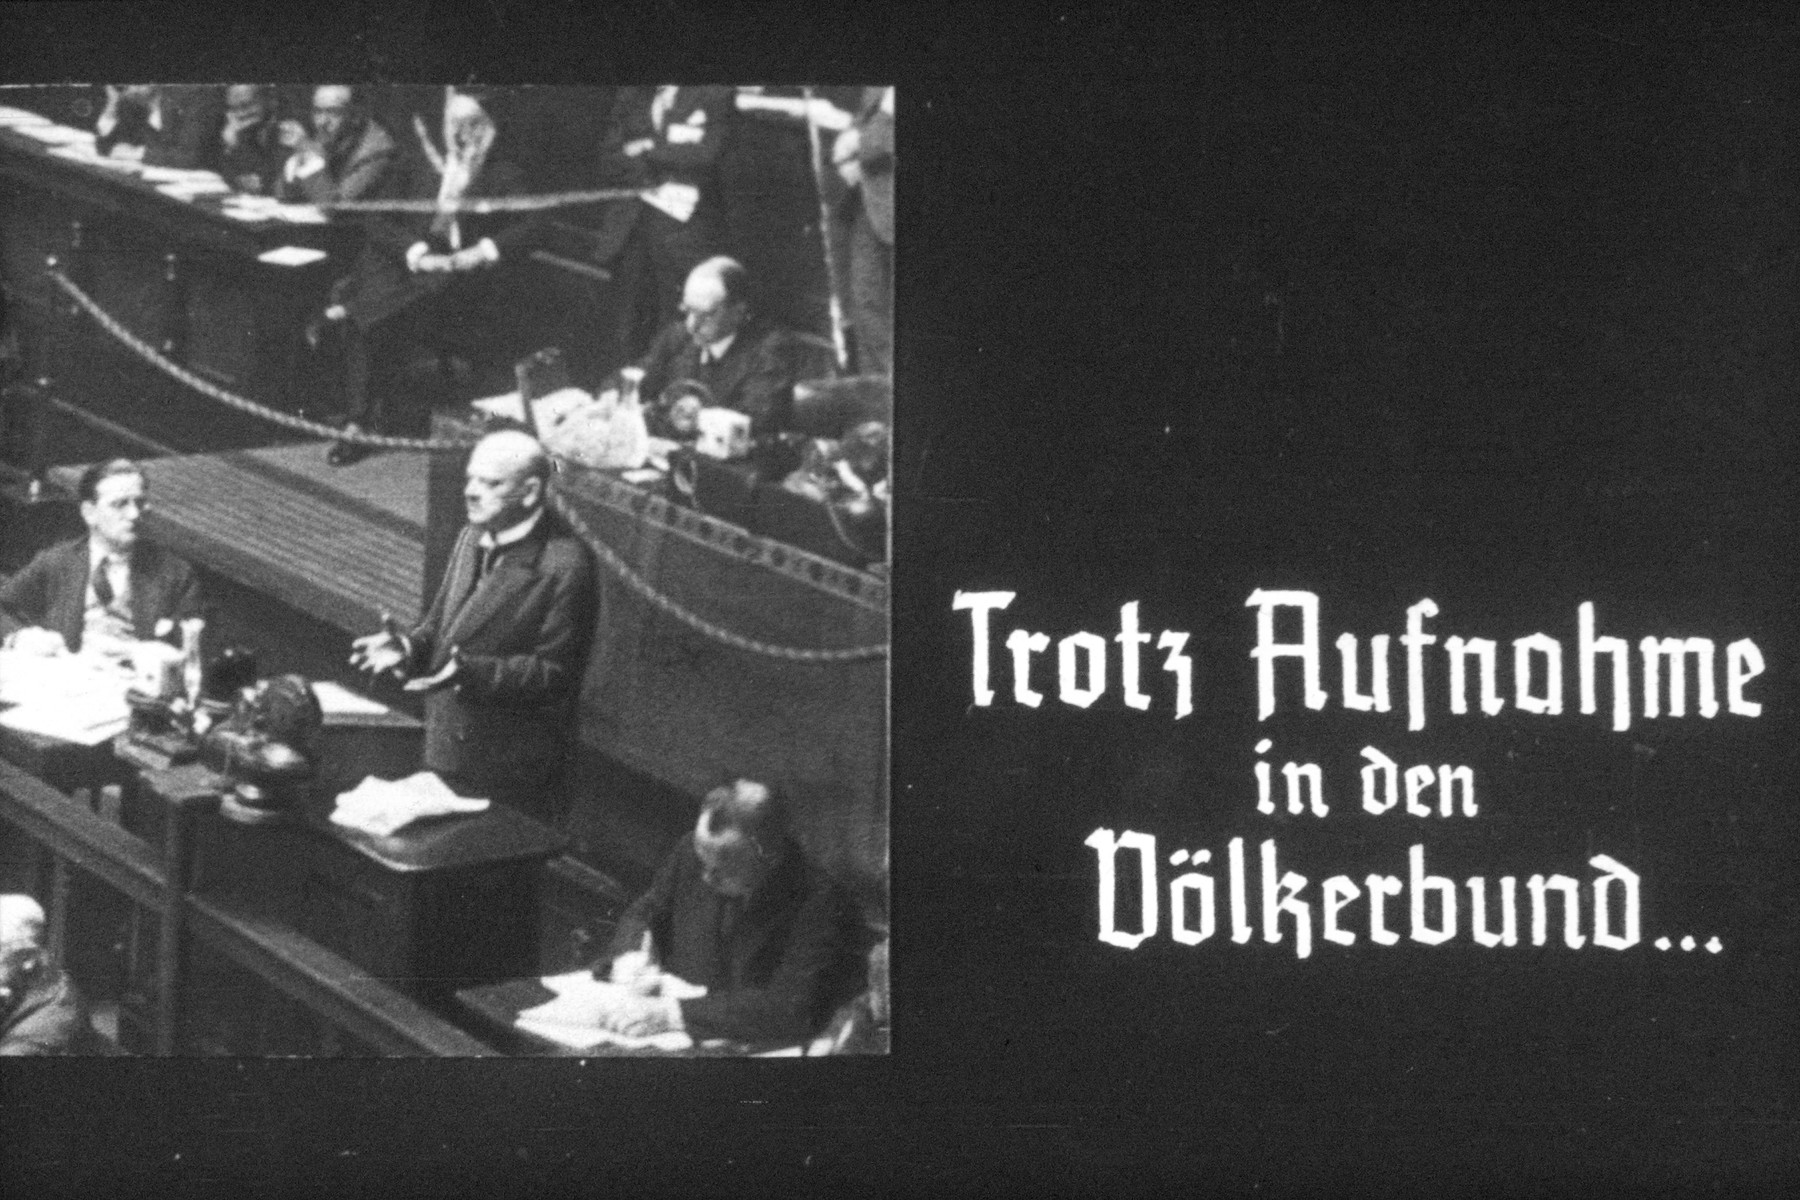 19th slide from a Hitler Youth slideshow about the aftermath of WWI, Versailles, how it was overcome and the rise of Nazism.

Trotz Aufnahme in den Völkerbund...

Despite inclusion in the League of Nations...